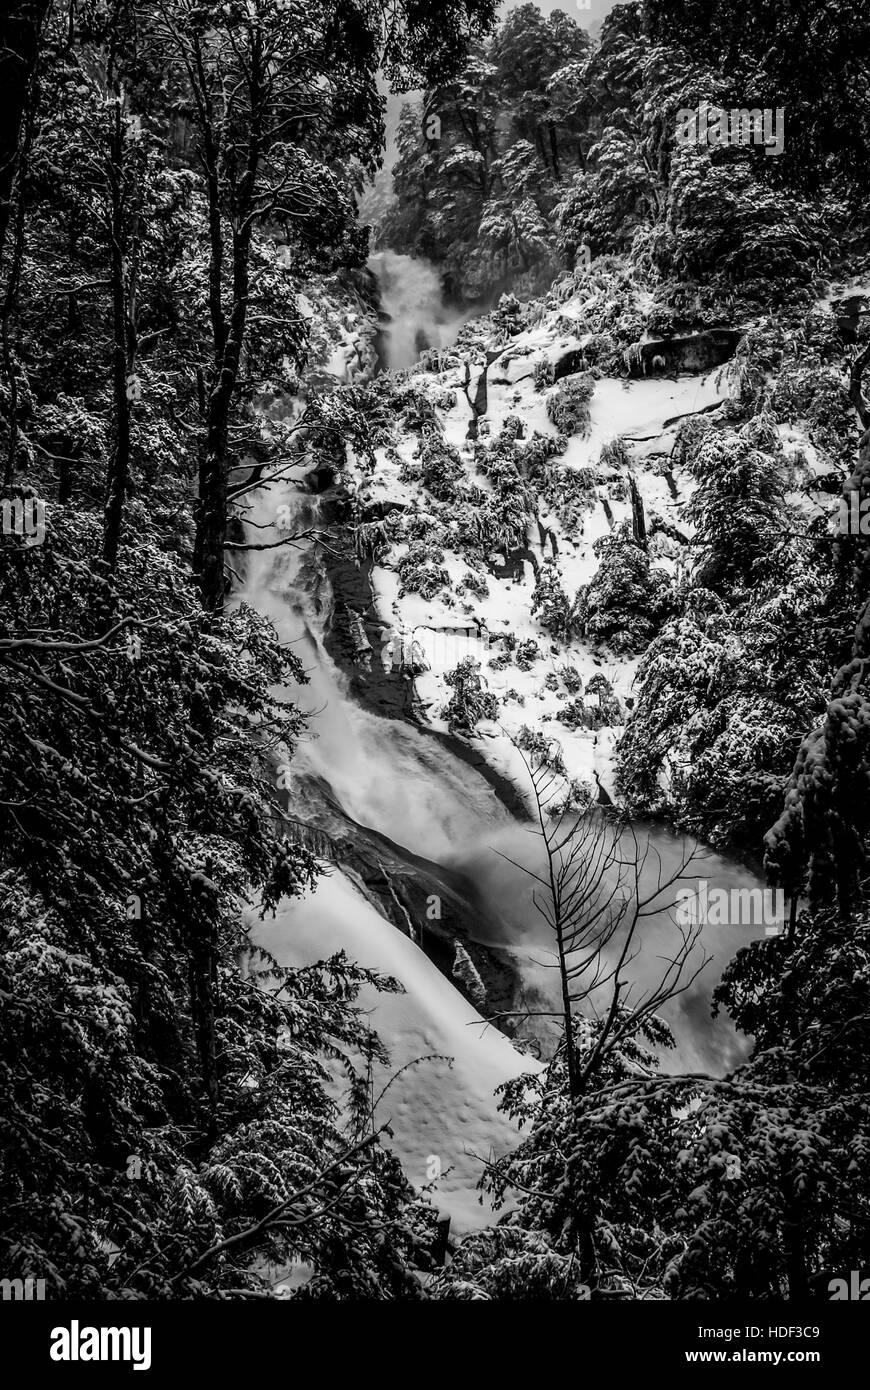 Photo of waterfall surrounded by snow in Parque Nacional Huerquehue in Chile. Stock Photo